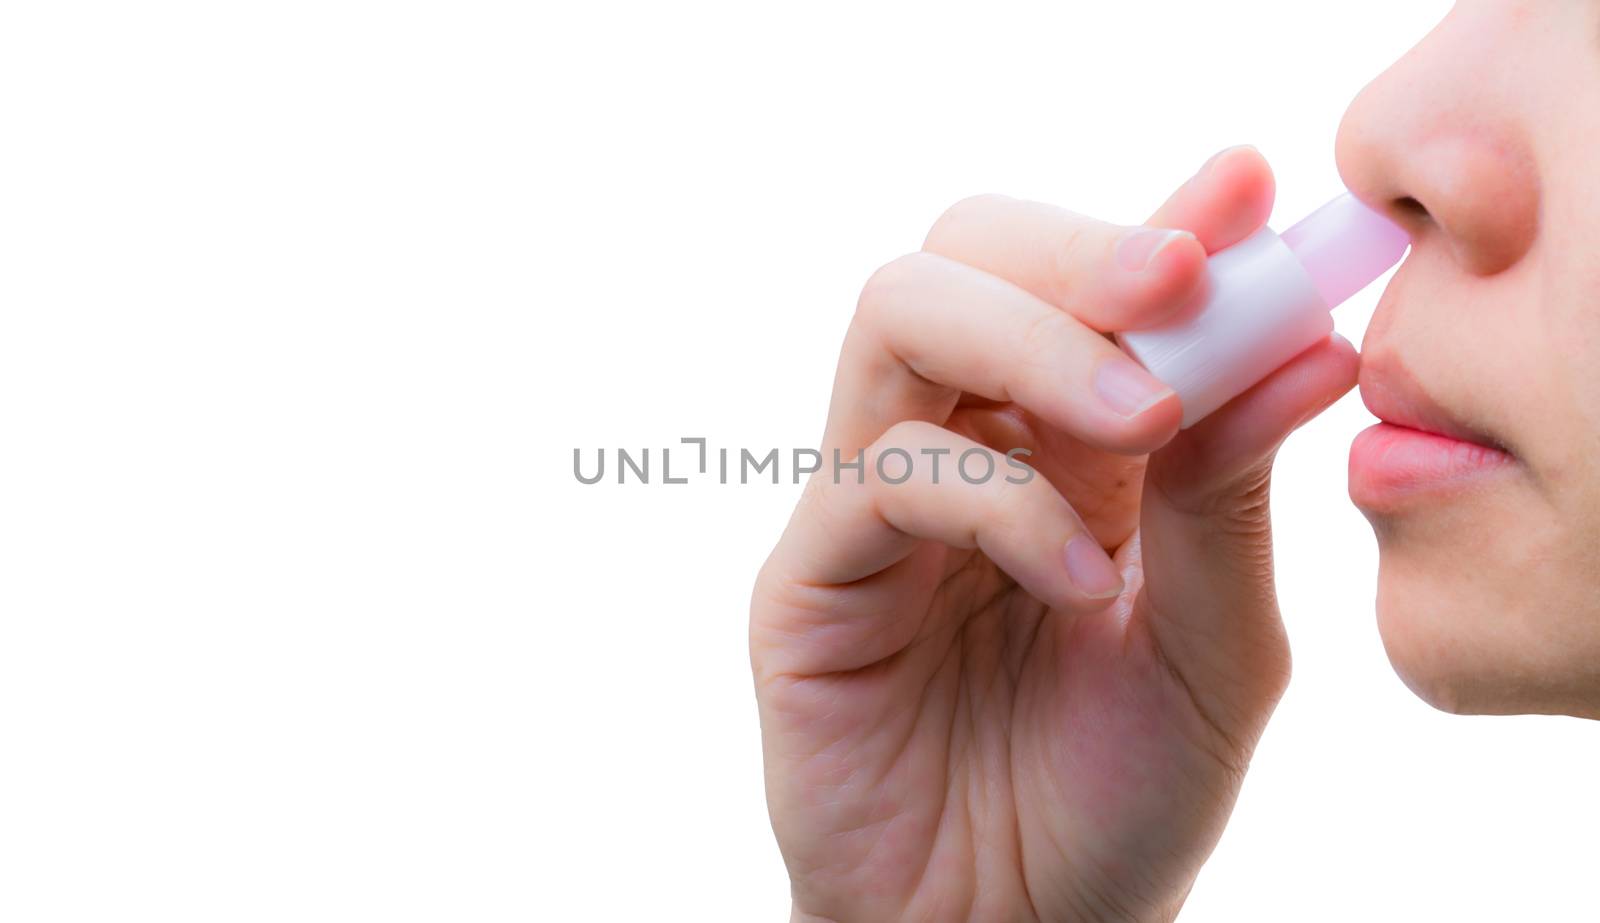 Asian Woman's hand hold nasal inhaler and inhale through nostril to relief nasal congestion for breathing more comfortable and help relieve the symptoms of motion sickness, relief vertigo, feel faint. by Fahroni